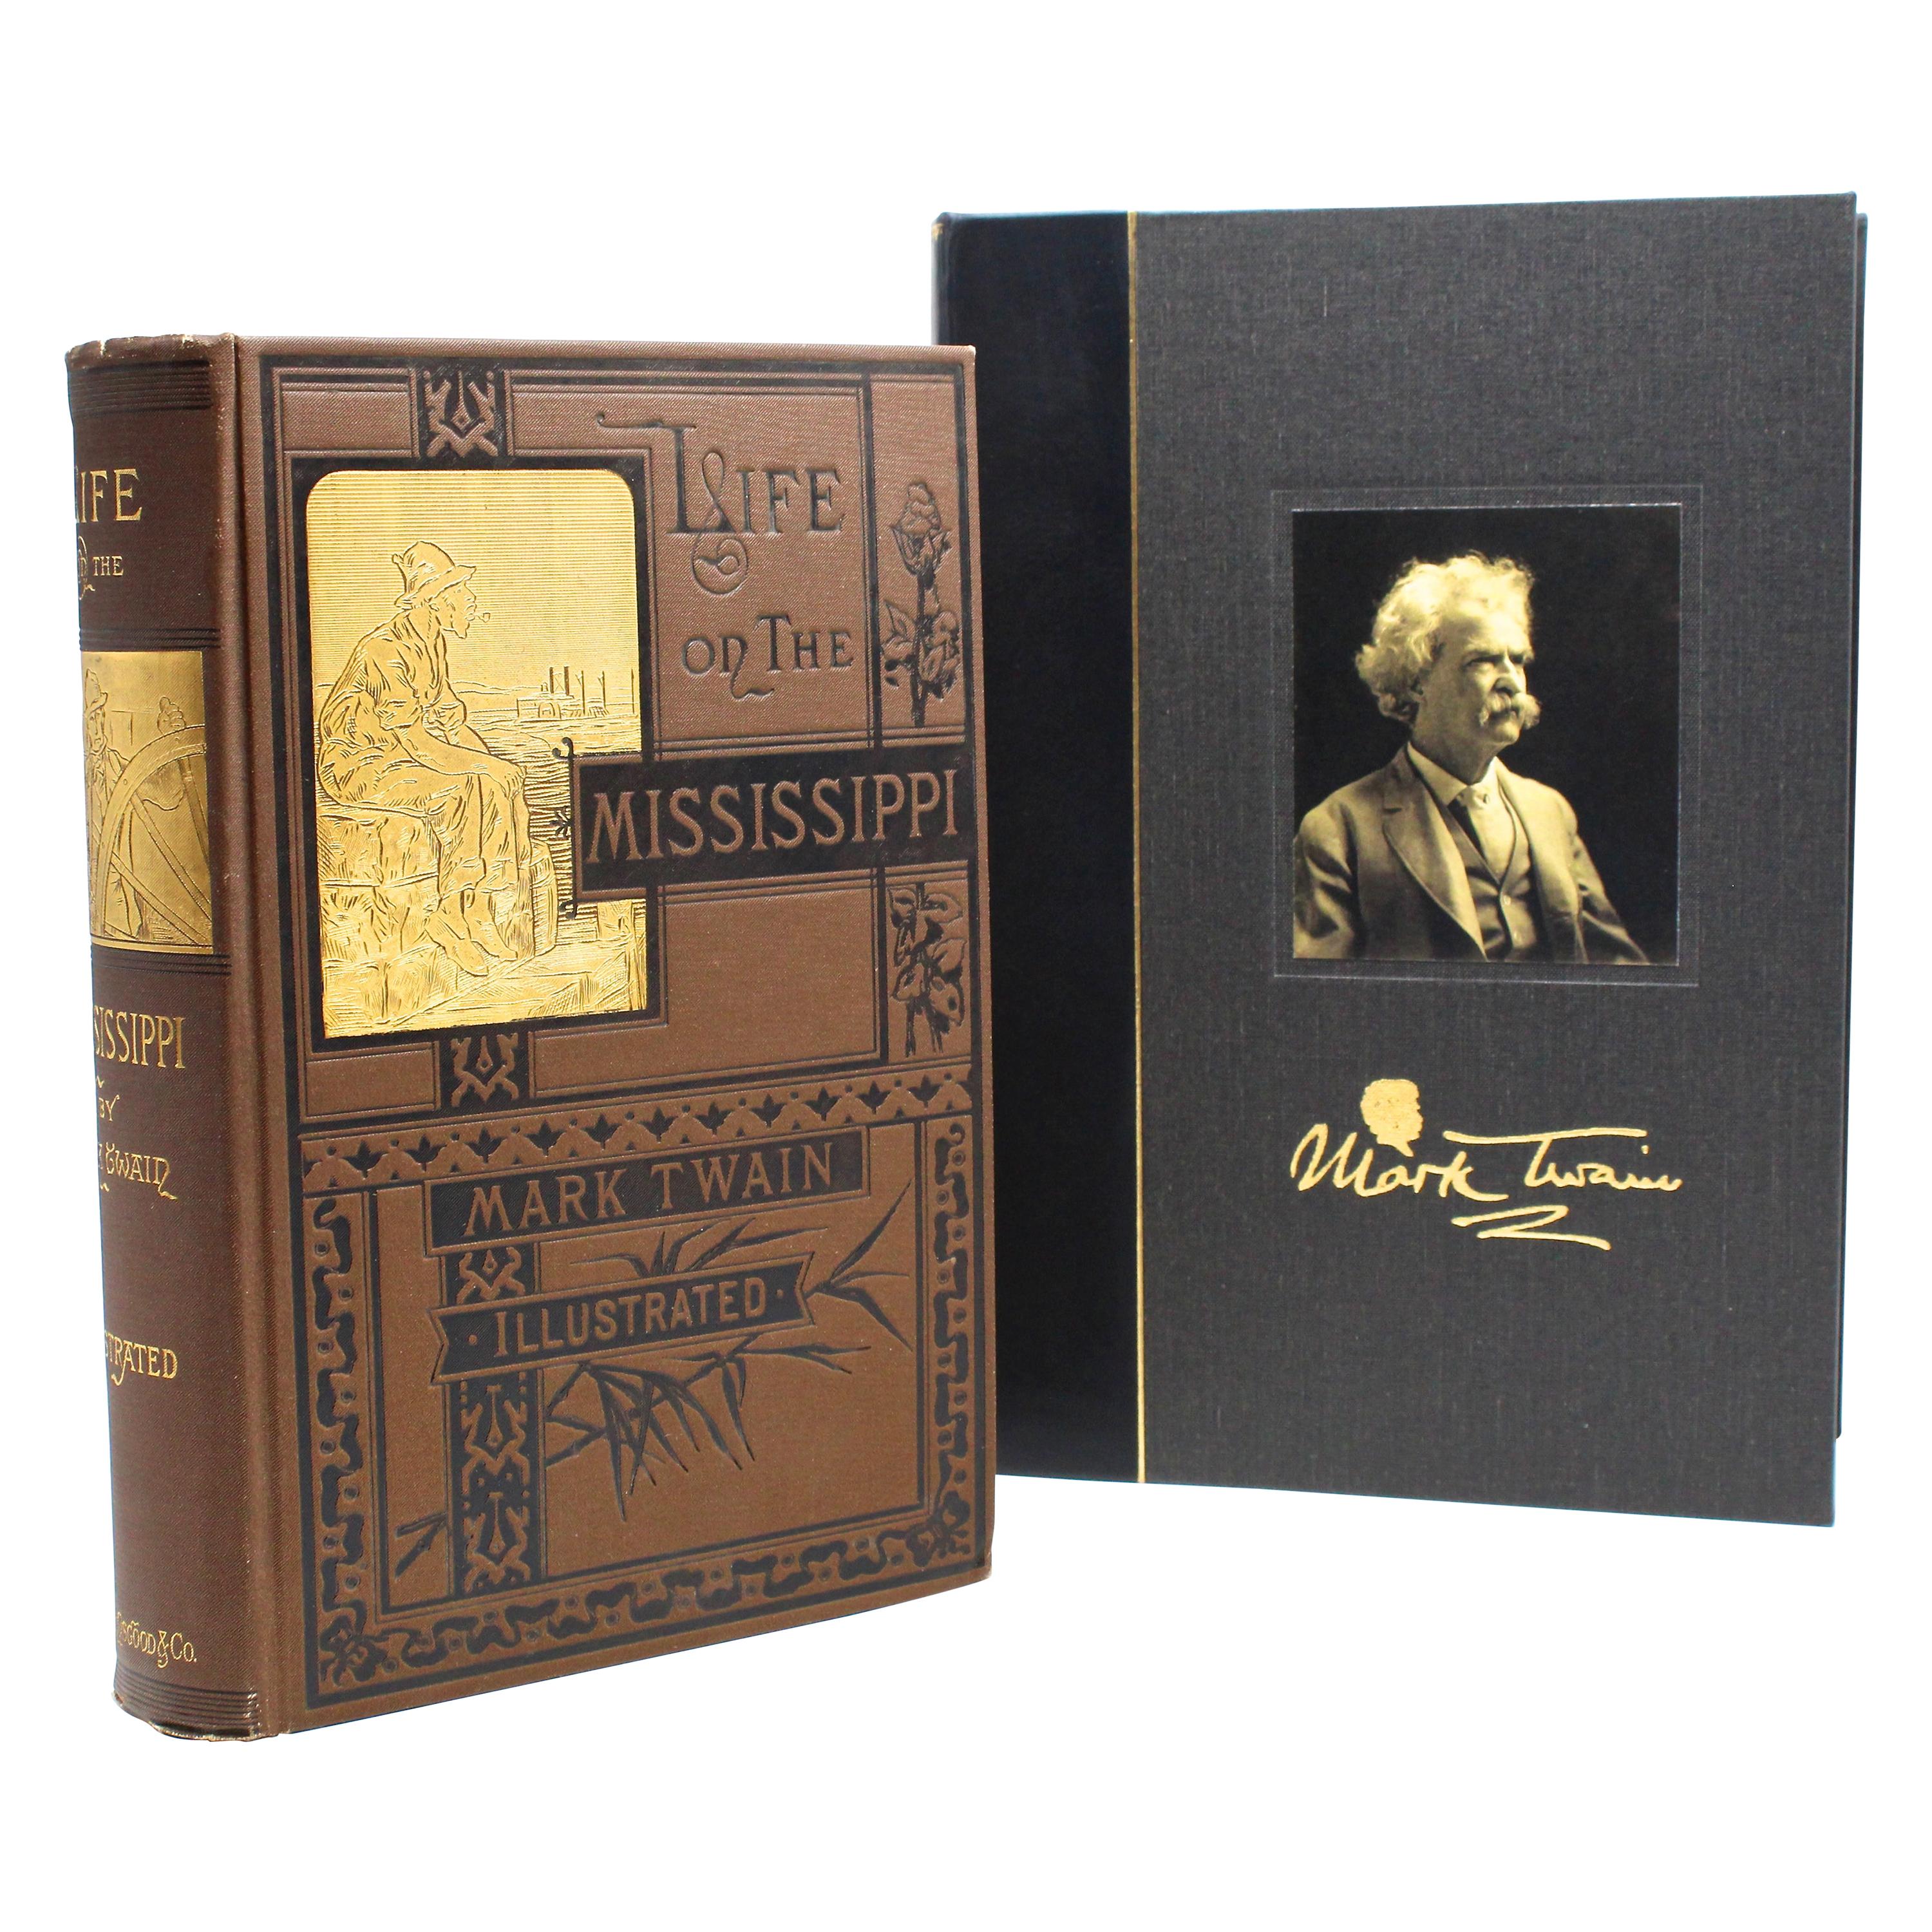 "Life on the Mississippi" by Mark Twain, First Edition, 1883